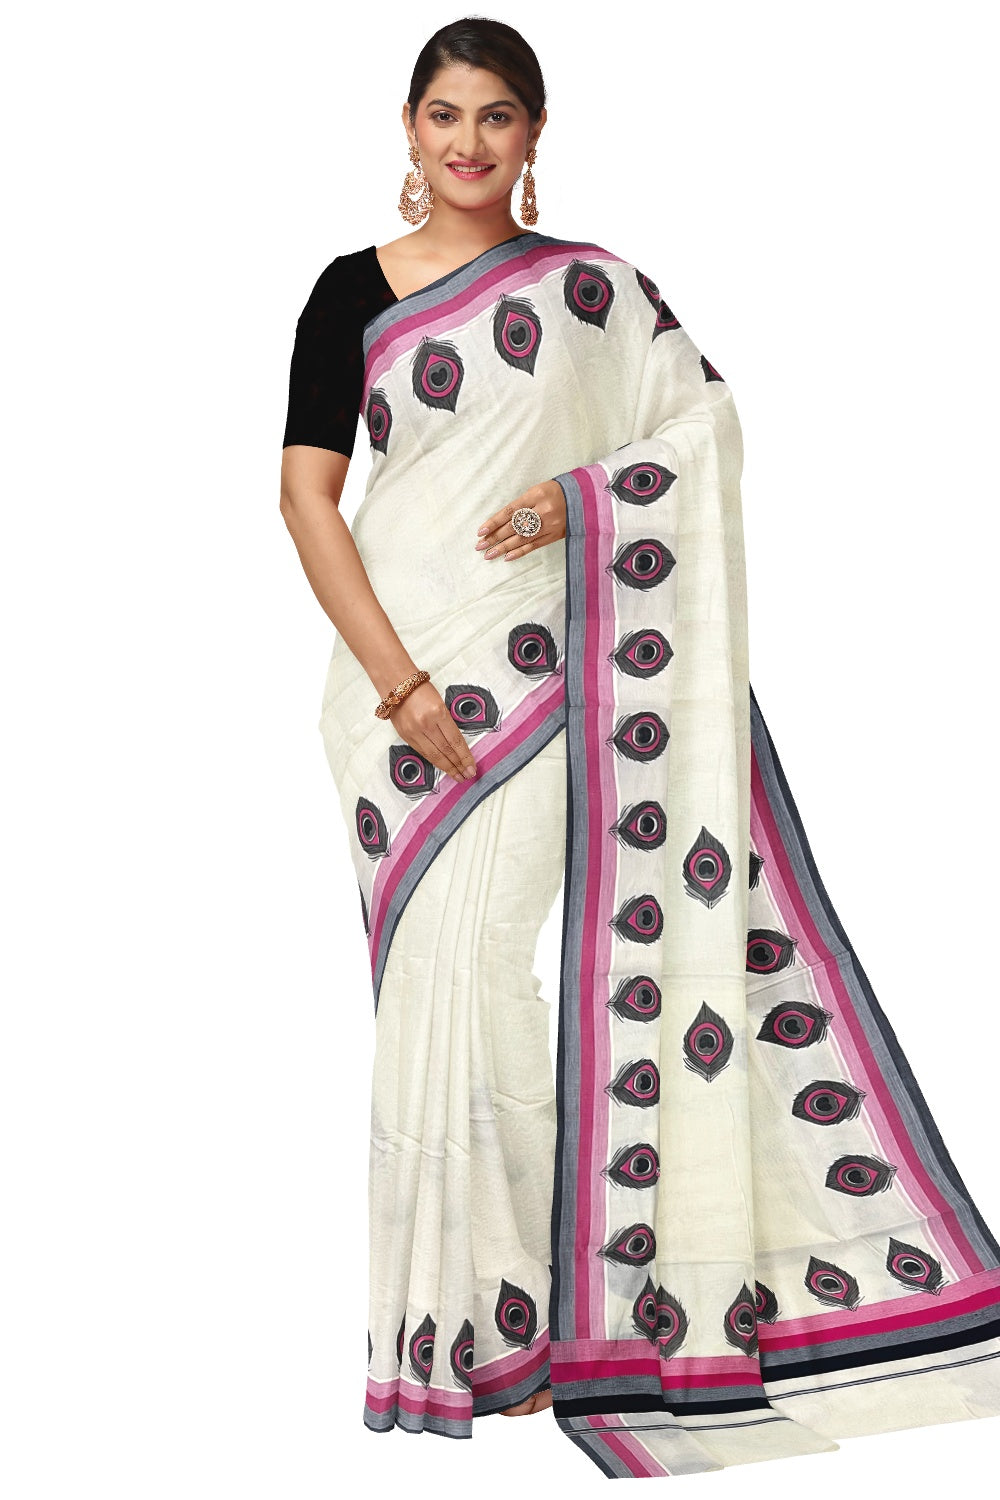 Kerala Cotton Saree with Black Peacock Feather Mural Printed and Multi Colour Border